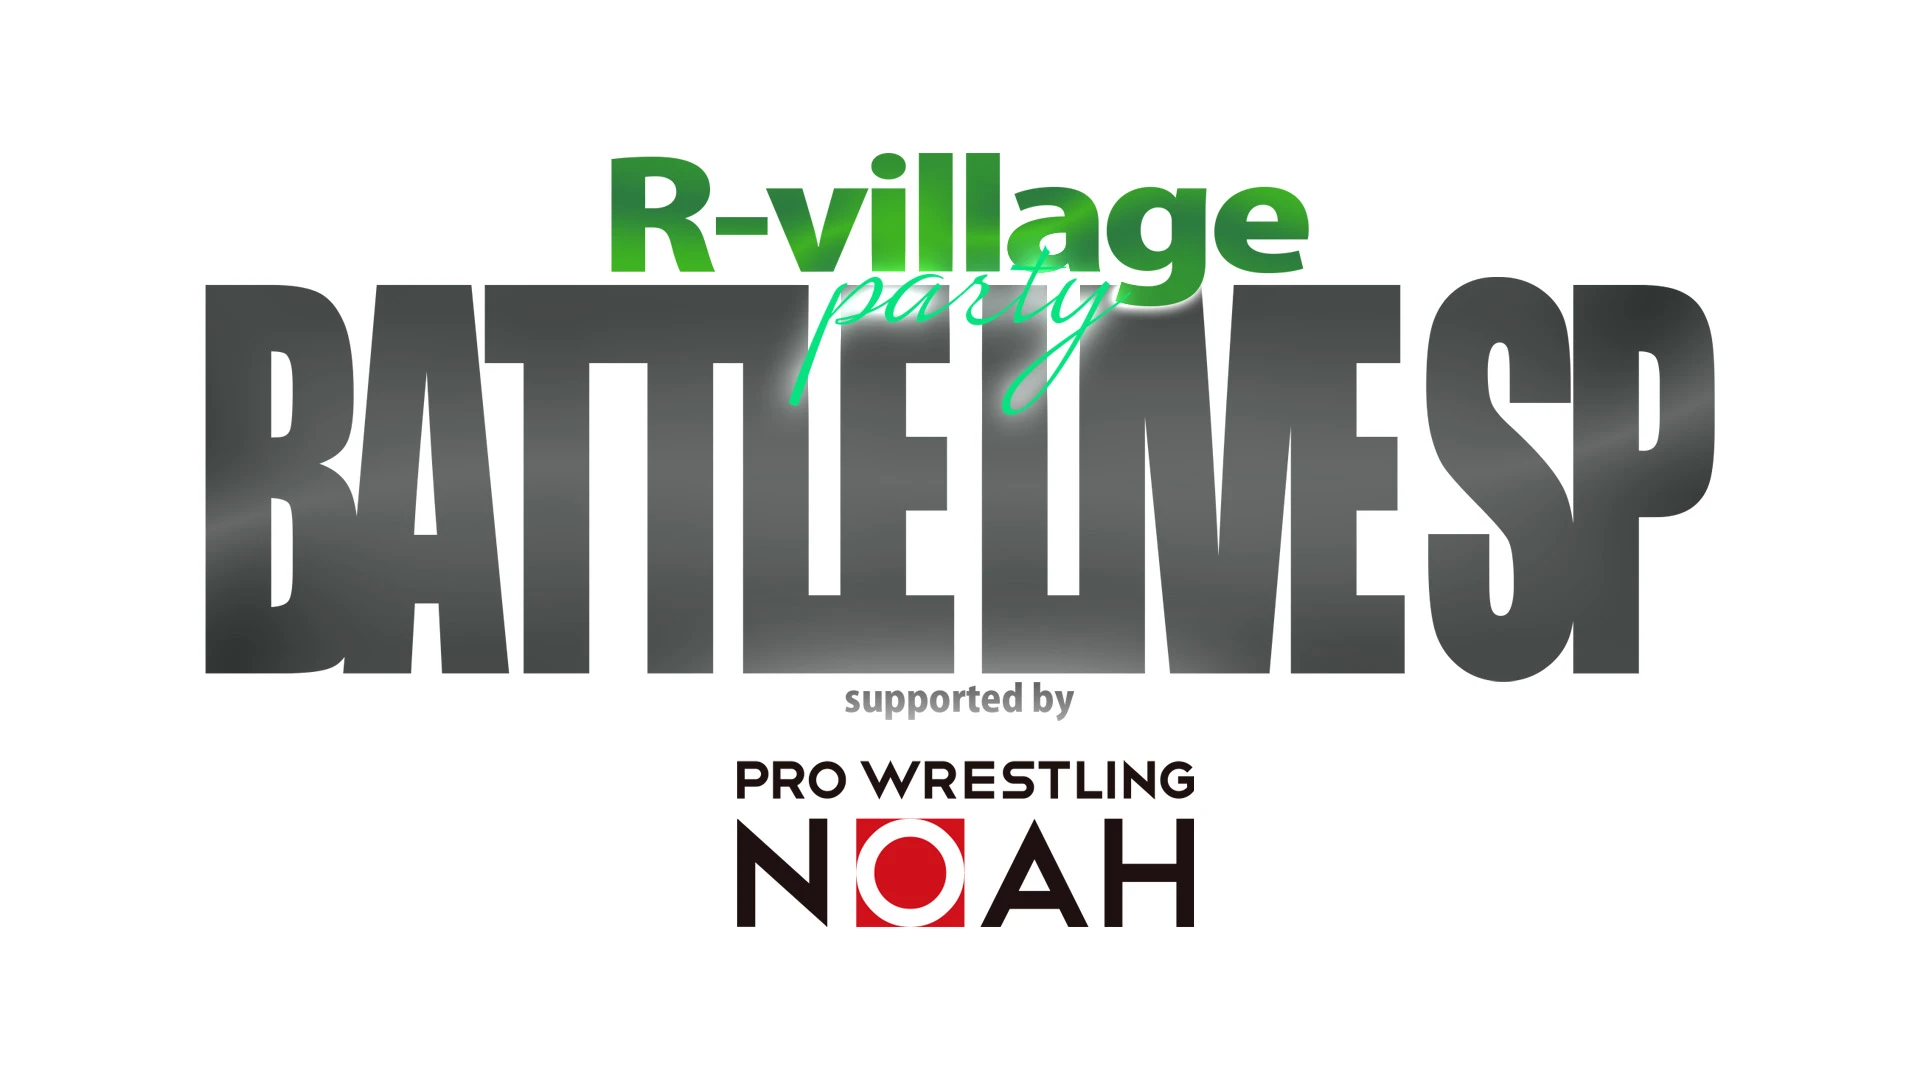 R-village PARTY～BATTLE LIVE SP～supported by PRO WRESTLING NOAH タイムスケジュールのお知らせ